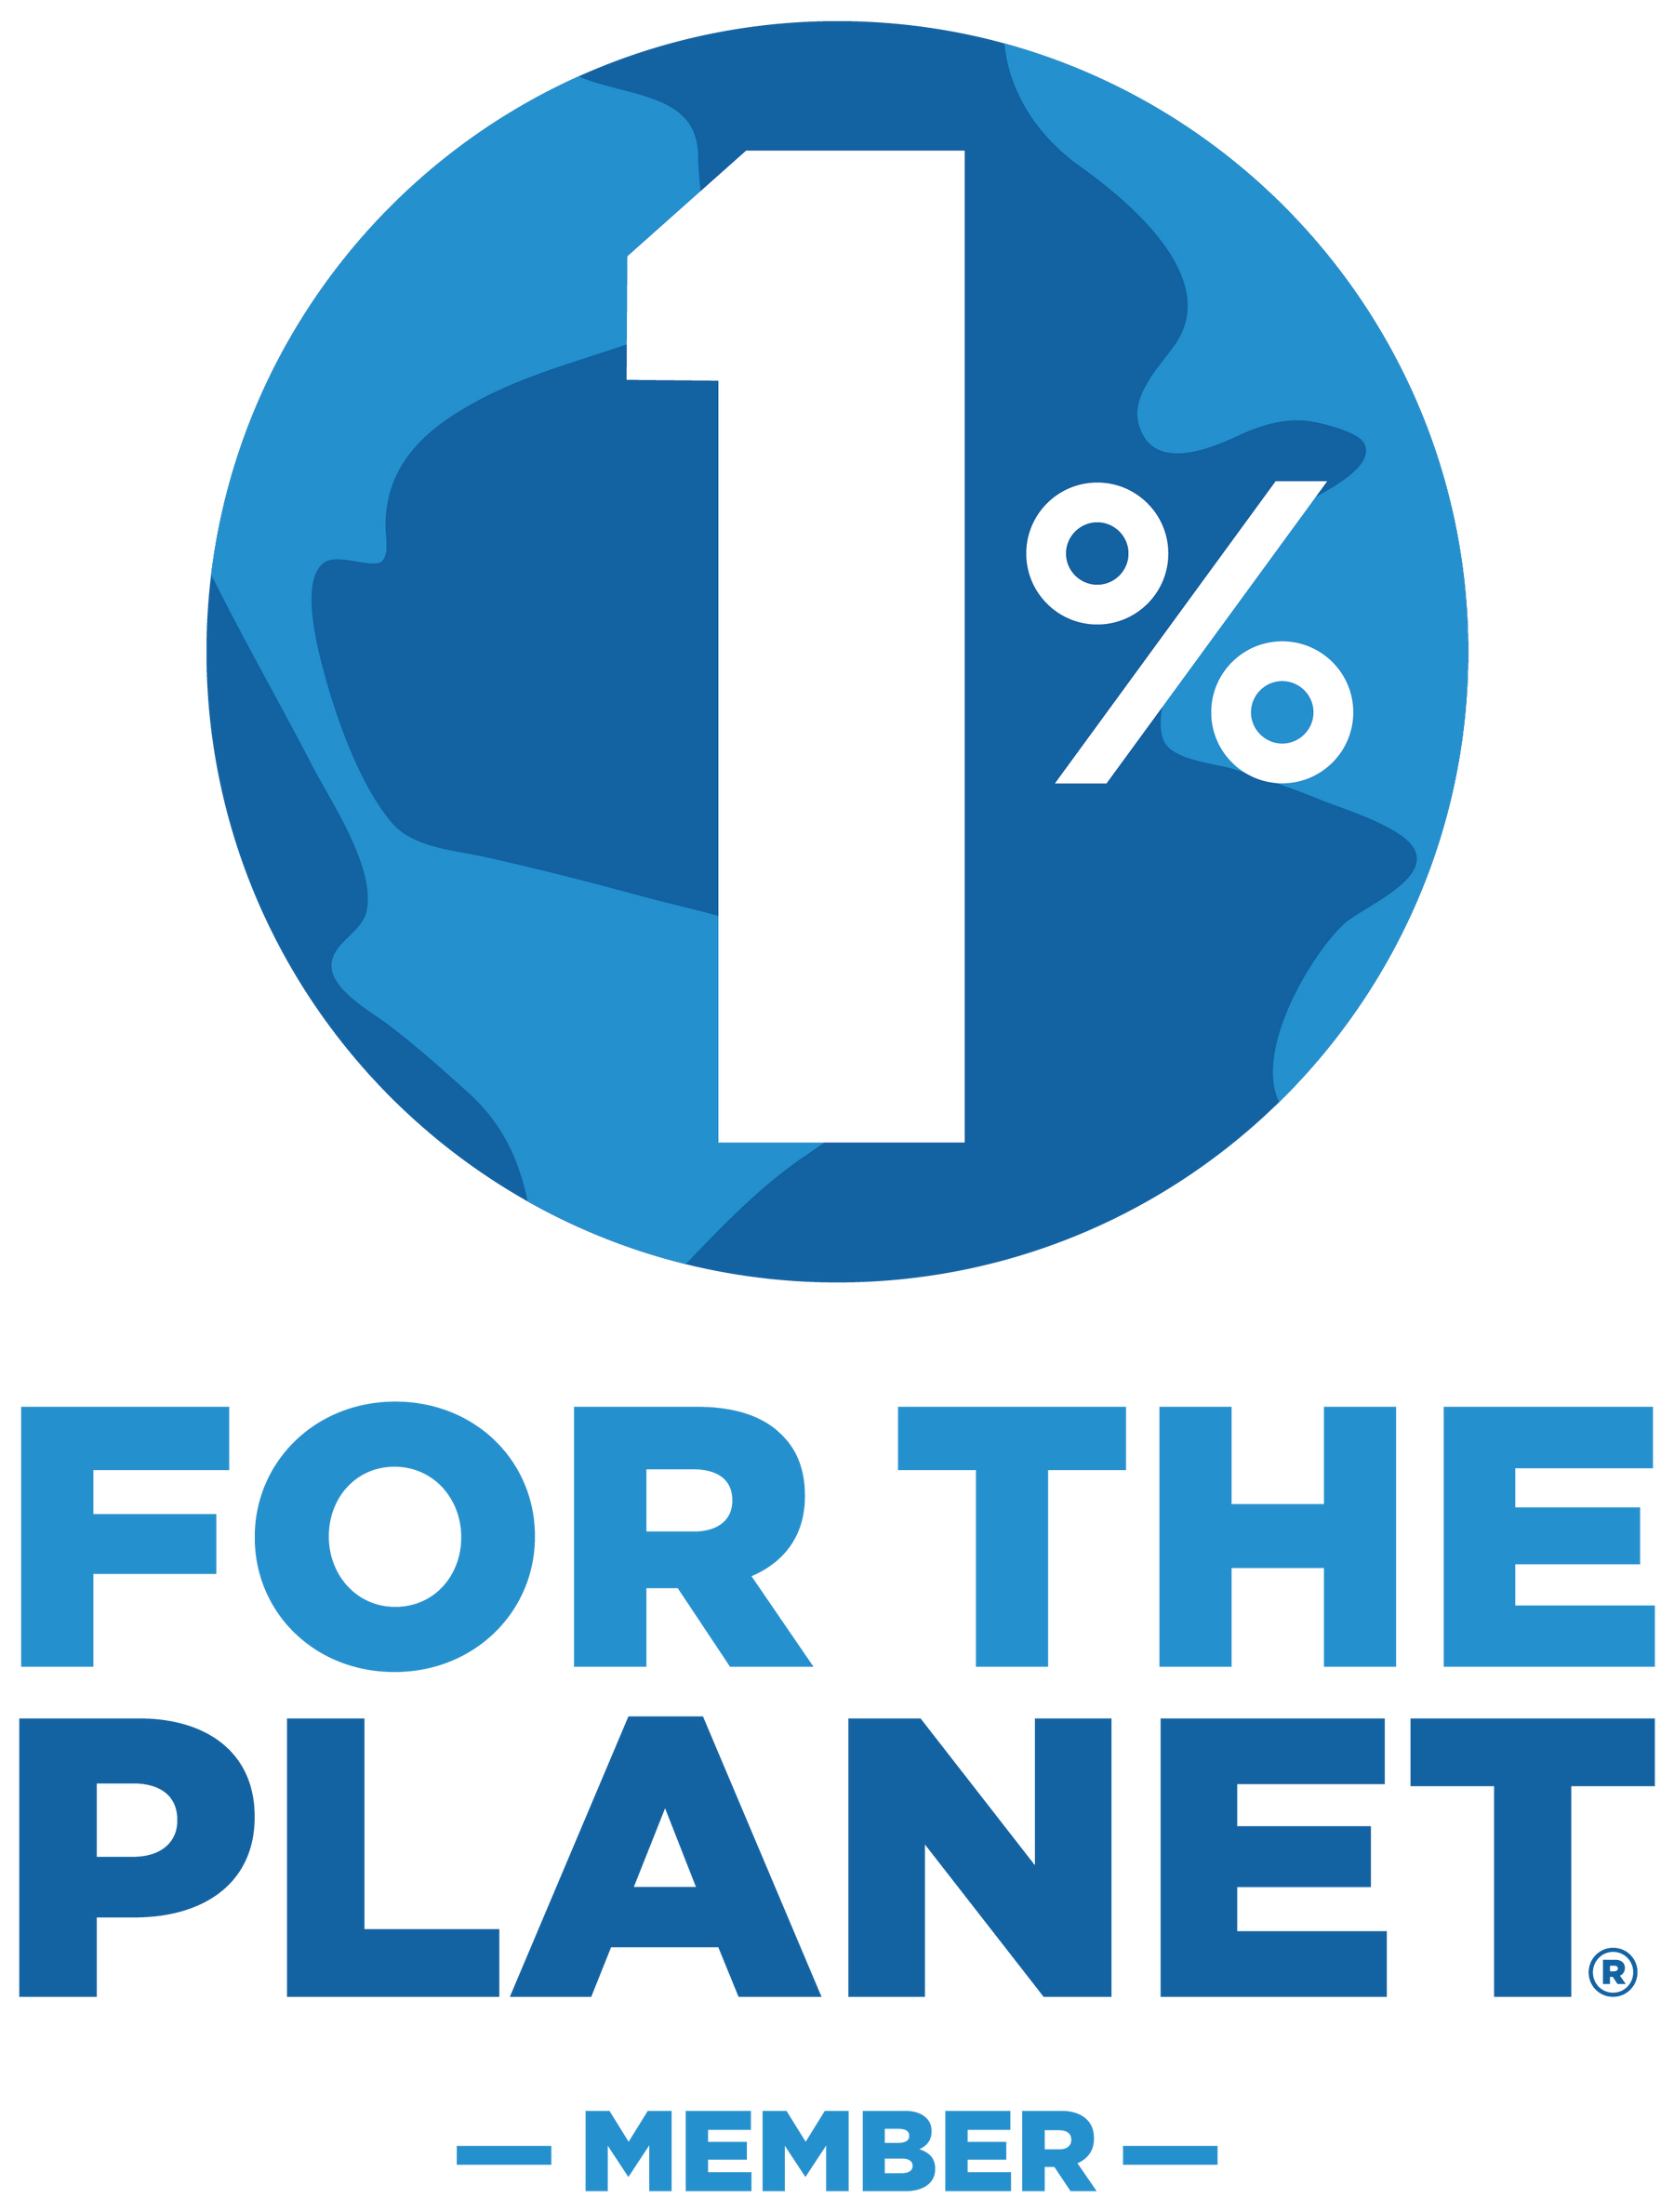 Heritage Bee Co is a proud member of the 1% For The Planet organization that works to give back to the Earth.